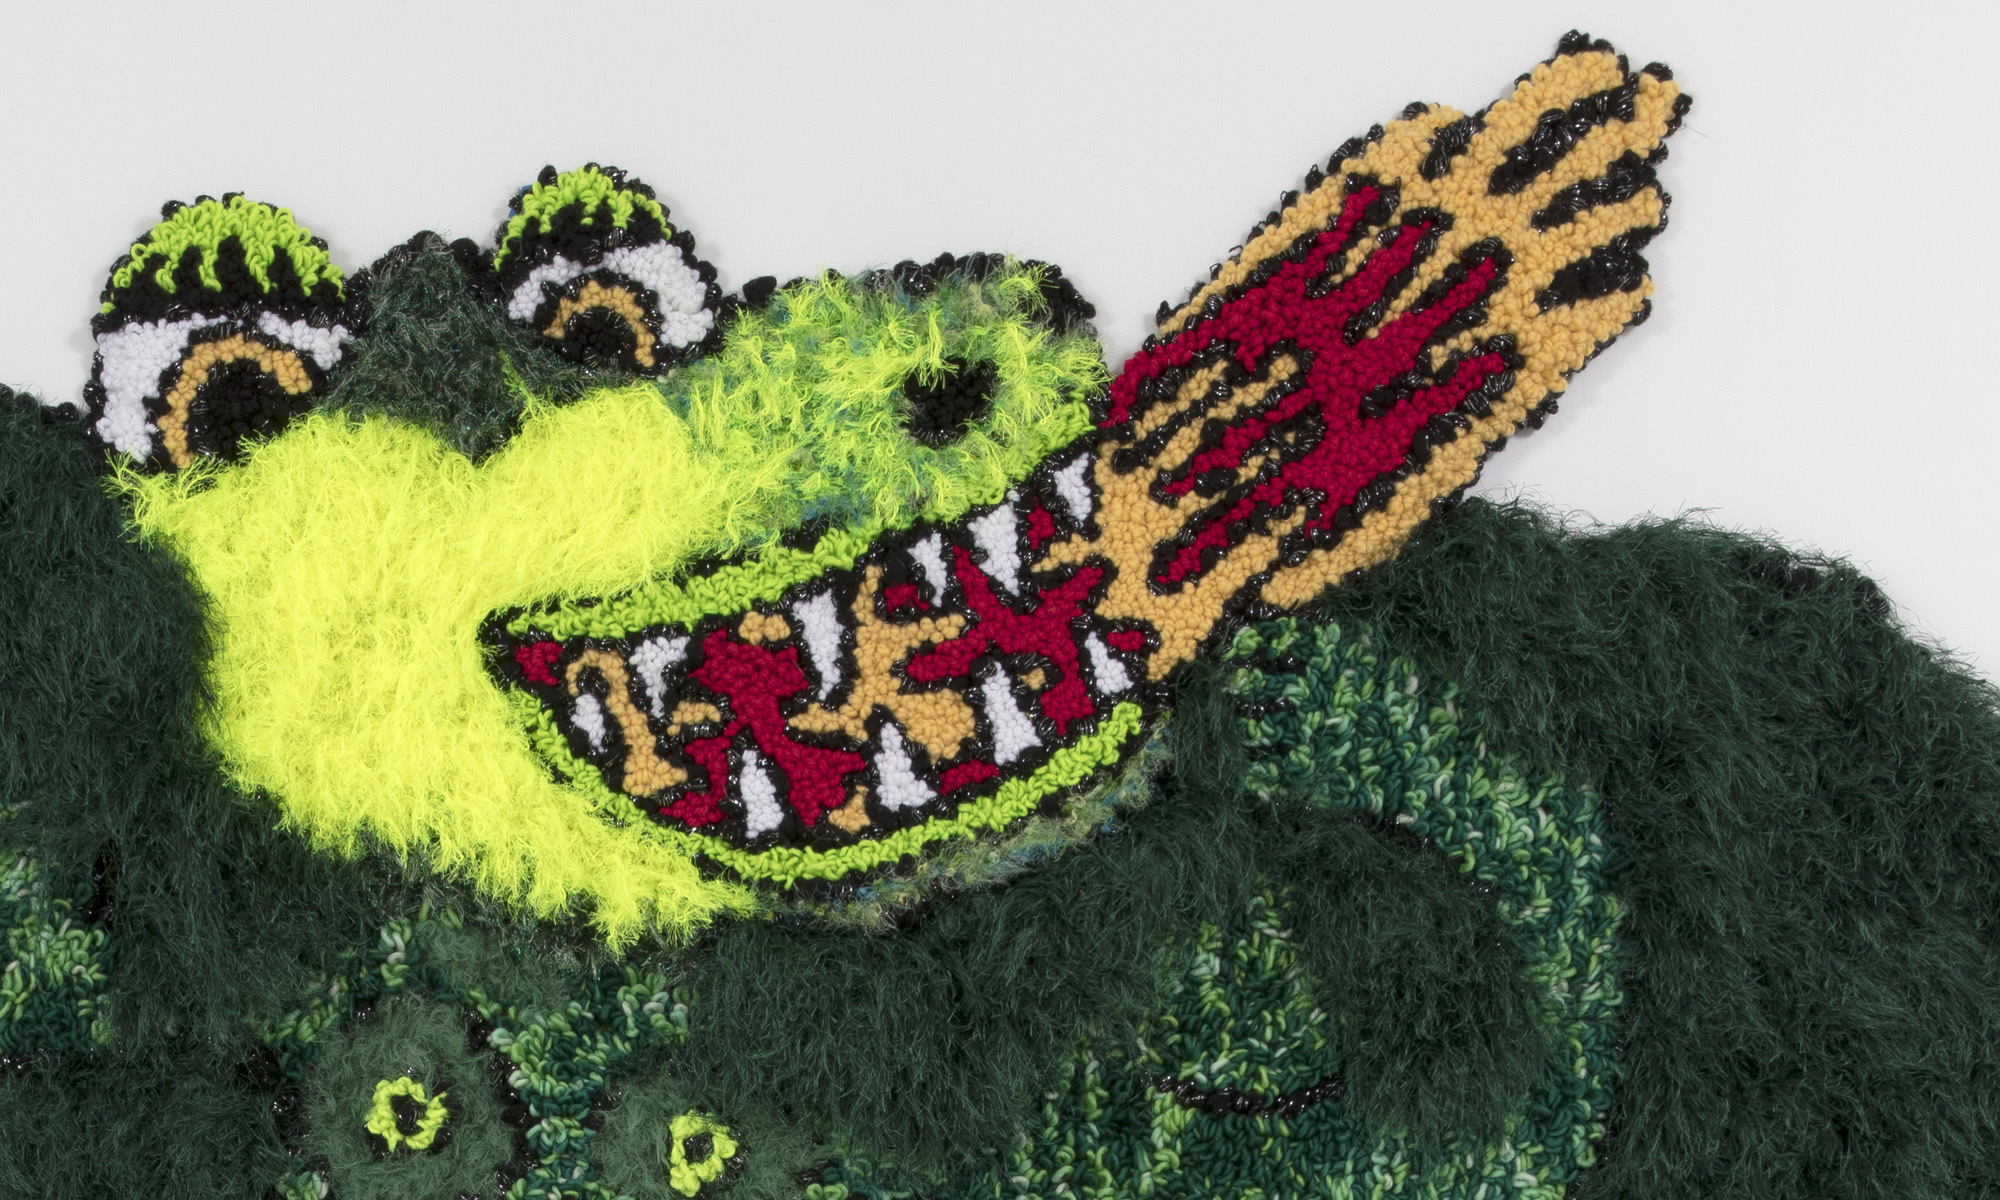 Hannah Epstein.<em> Like a dragon unfurled its wings</em>, 2019. Wool, acrylic, polyester and burlap, 113 x 120 inches (287 x 304.8 cm)